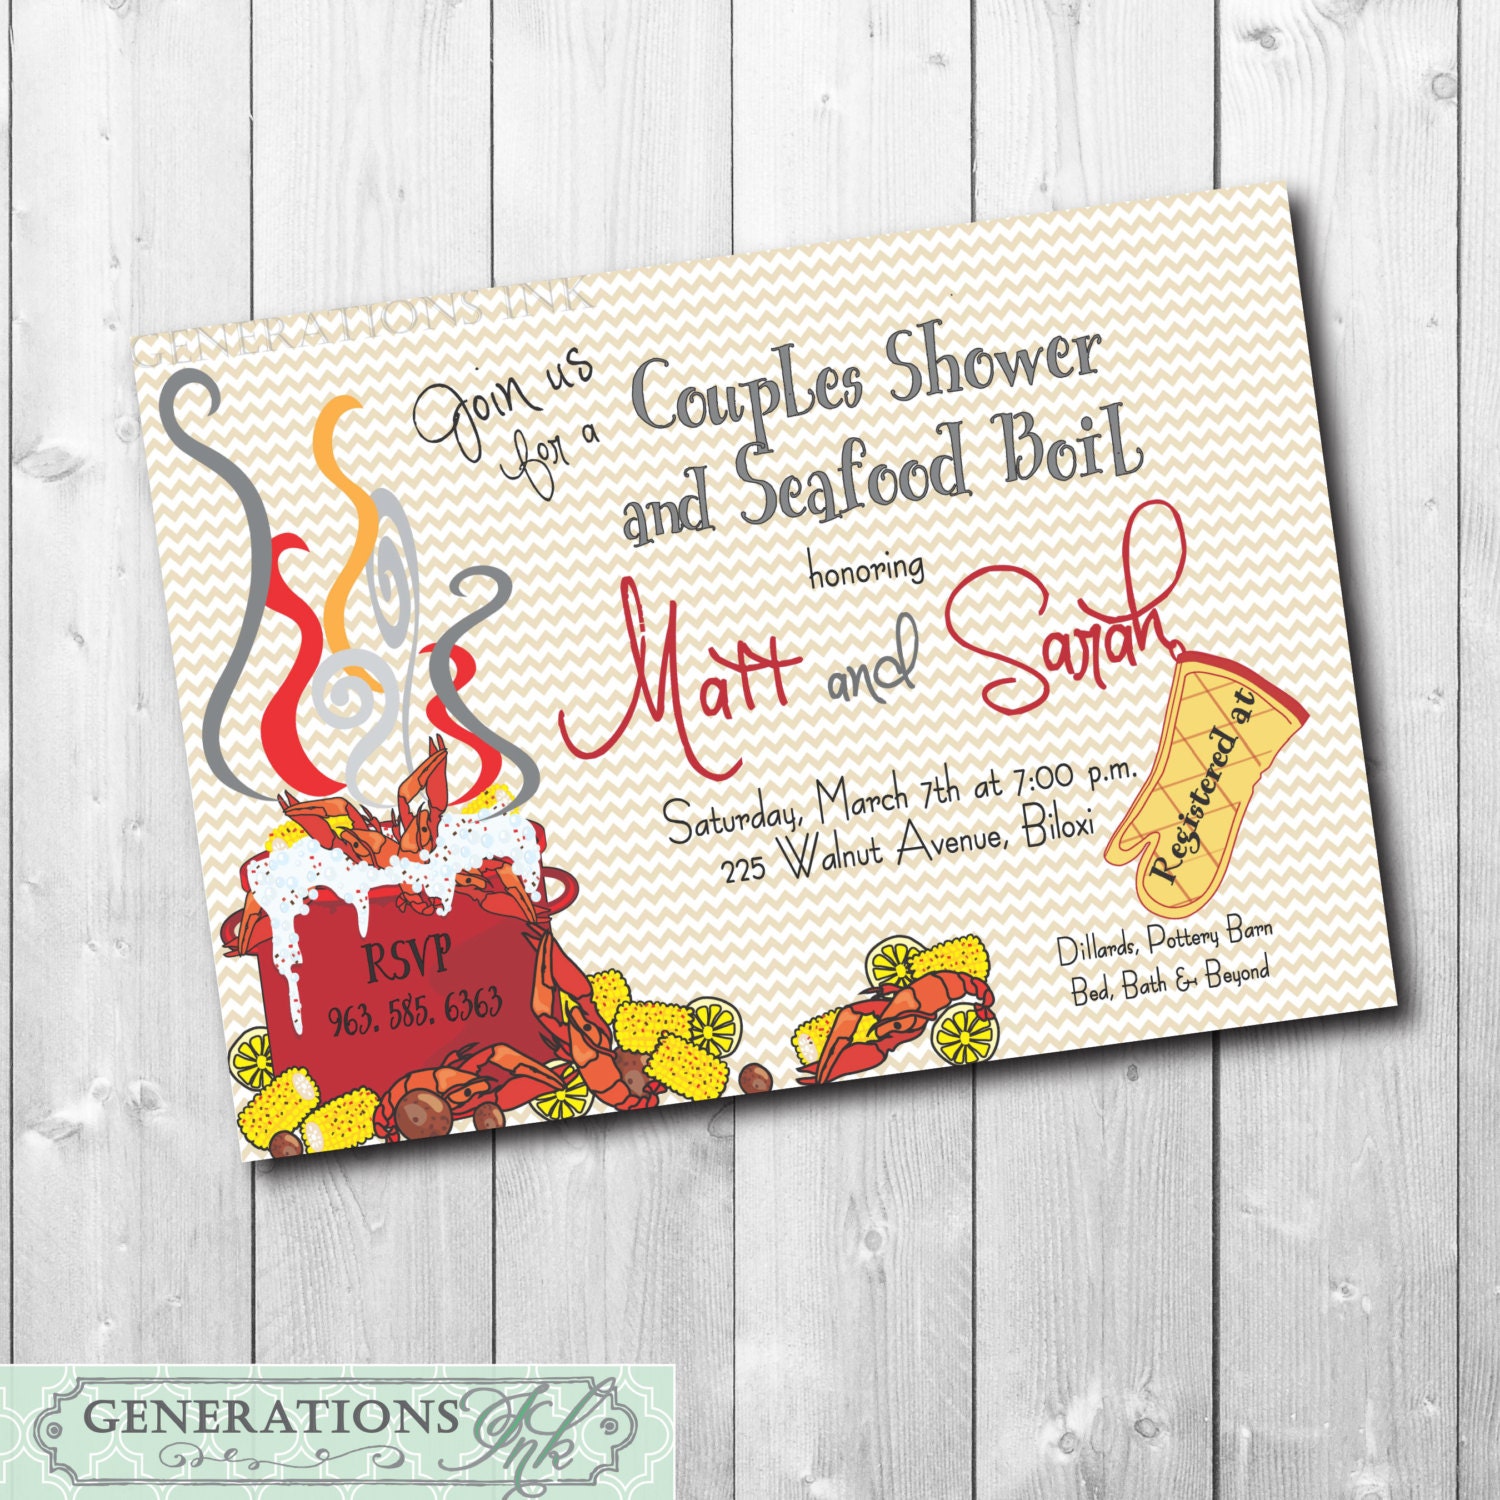 Couples Shower & Seafood Or Crawfish Boil Invitation/Digital File Printable/ Wording Can Be Changed